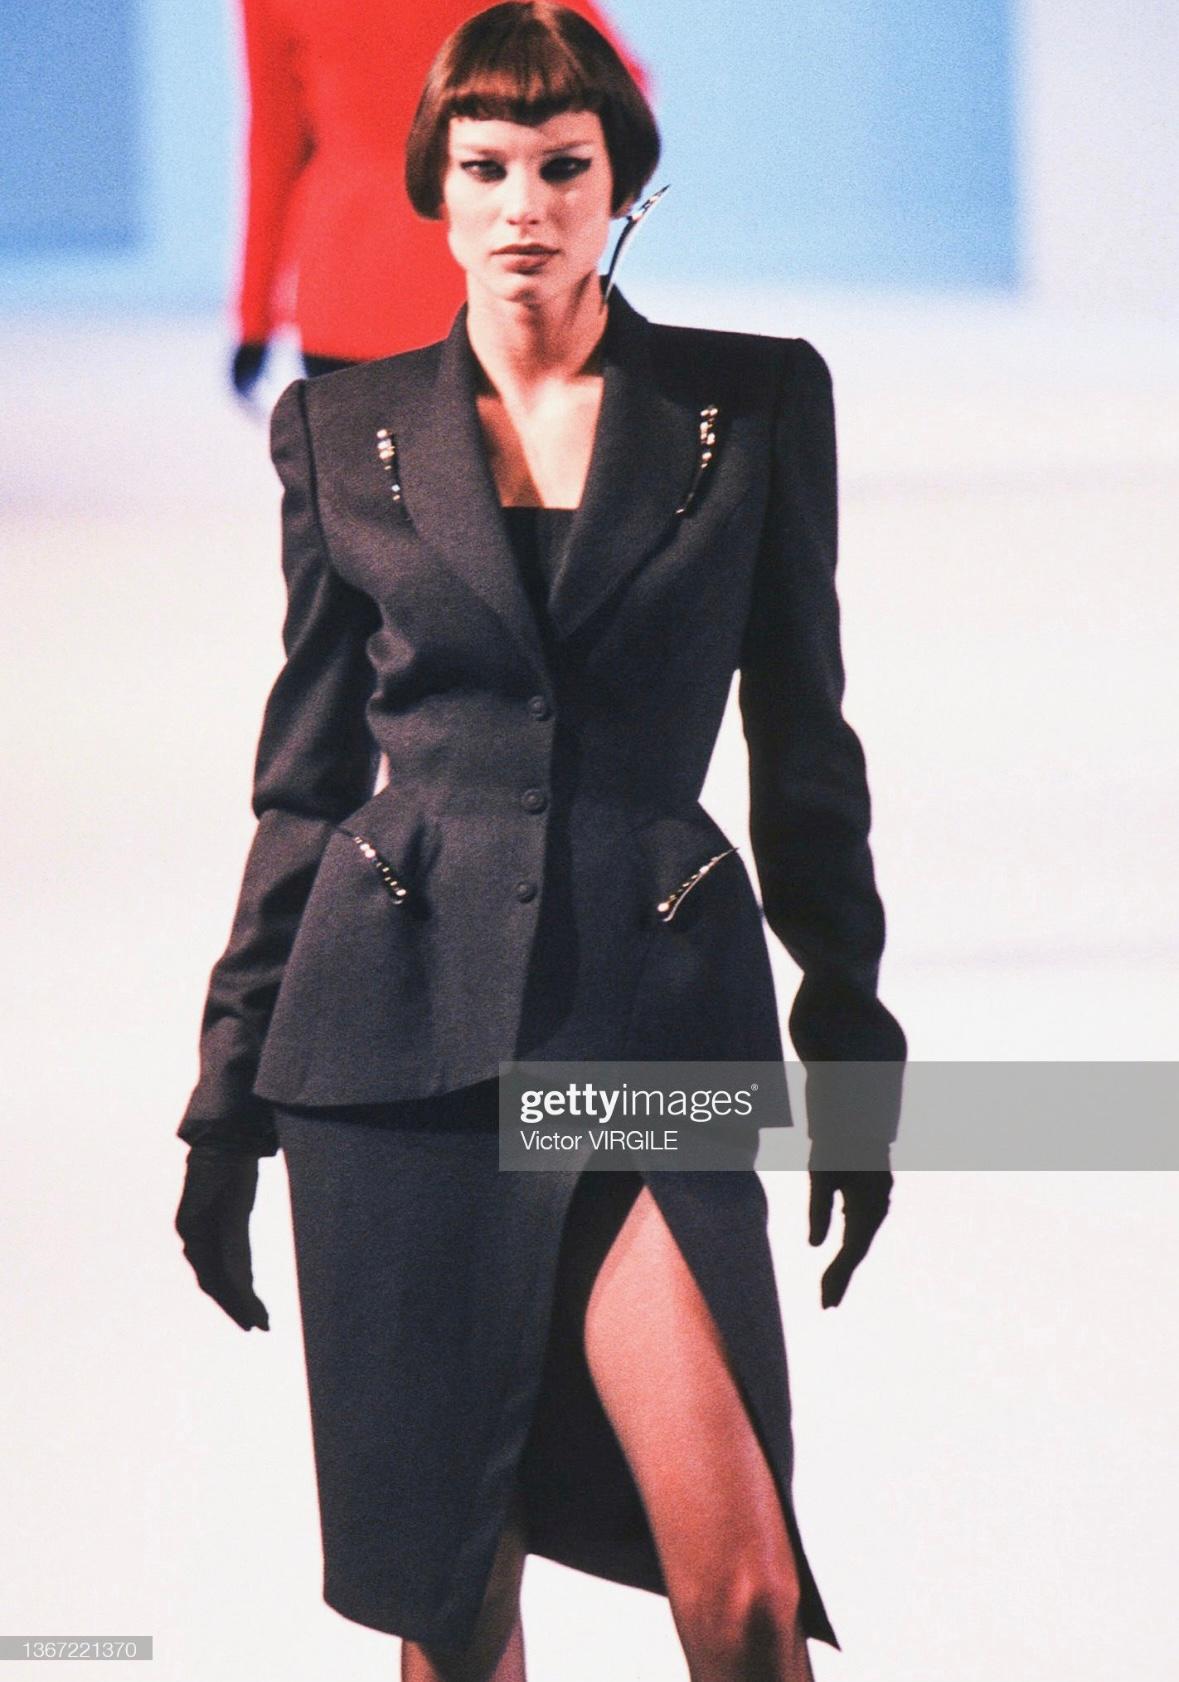 Presenting a sculptural purple Thierry Mugler skirt suit, designed by Manfred Mugler. From the Fall/Winter 1998 collection, this incredible suit debuted in the season's runway presentation. The blazer features large sculptural silver-tone elements